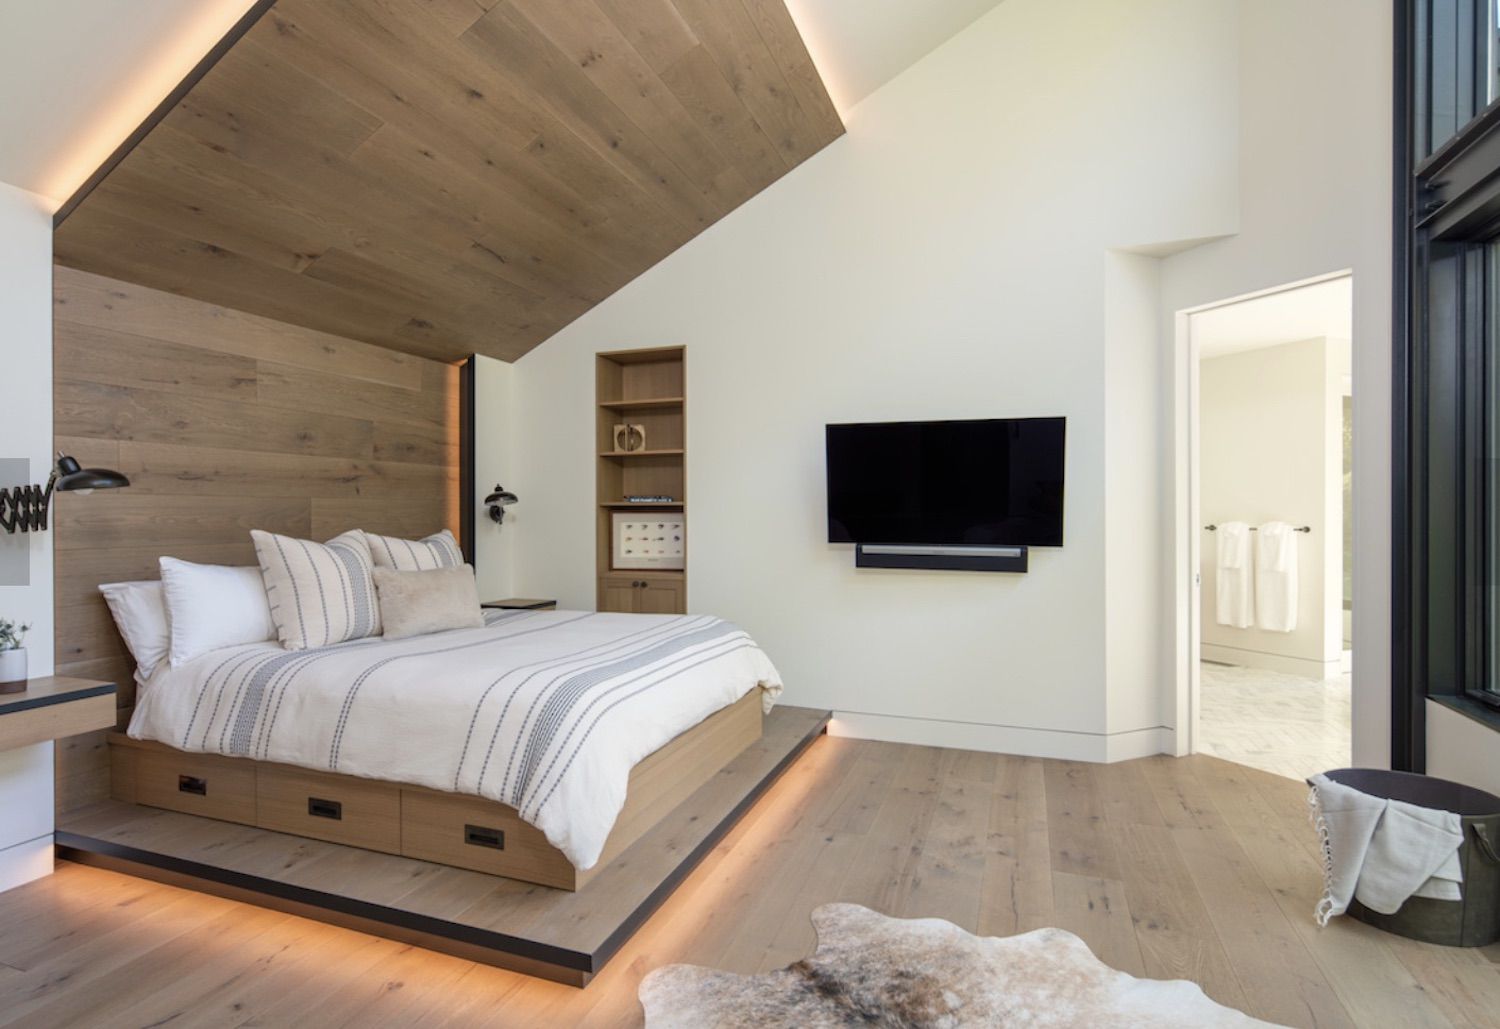 modern bedroom with wooden light accent wall and bed frame, wooden floor, open floorplan